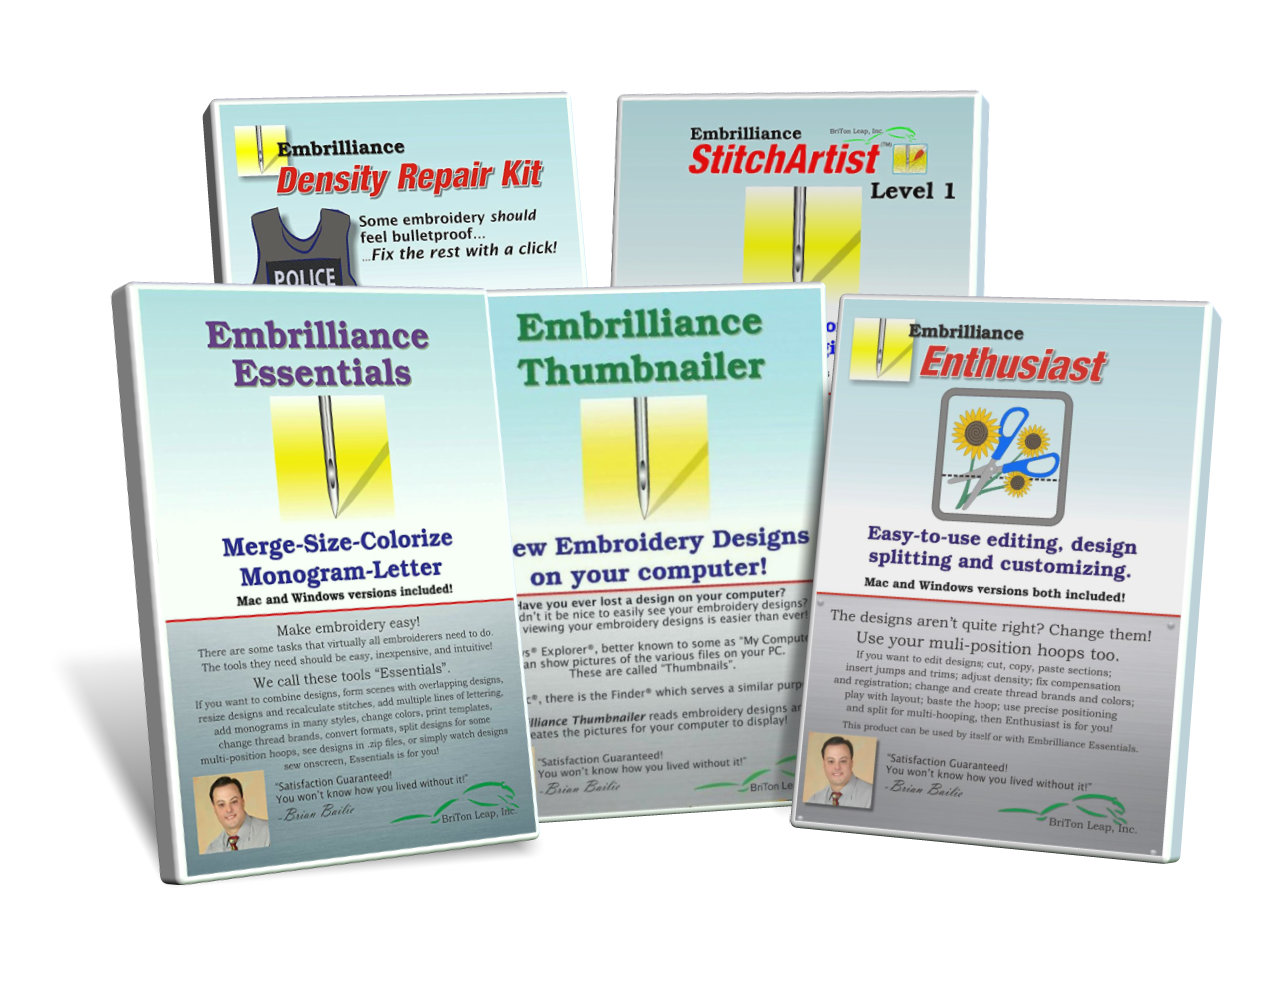 Embrilliance Enthusiast Embroidery Machine Software for Win & Mac